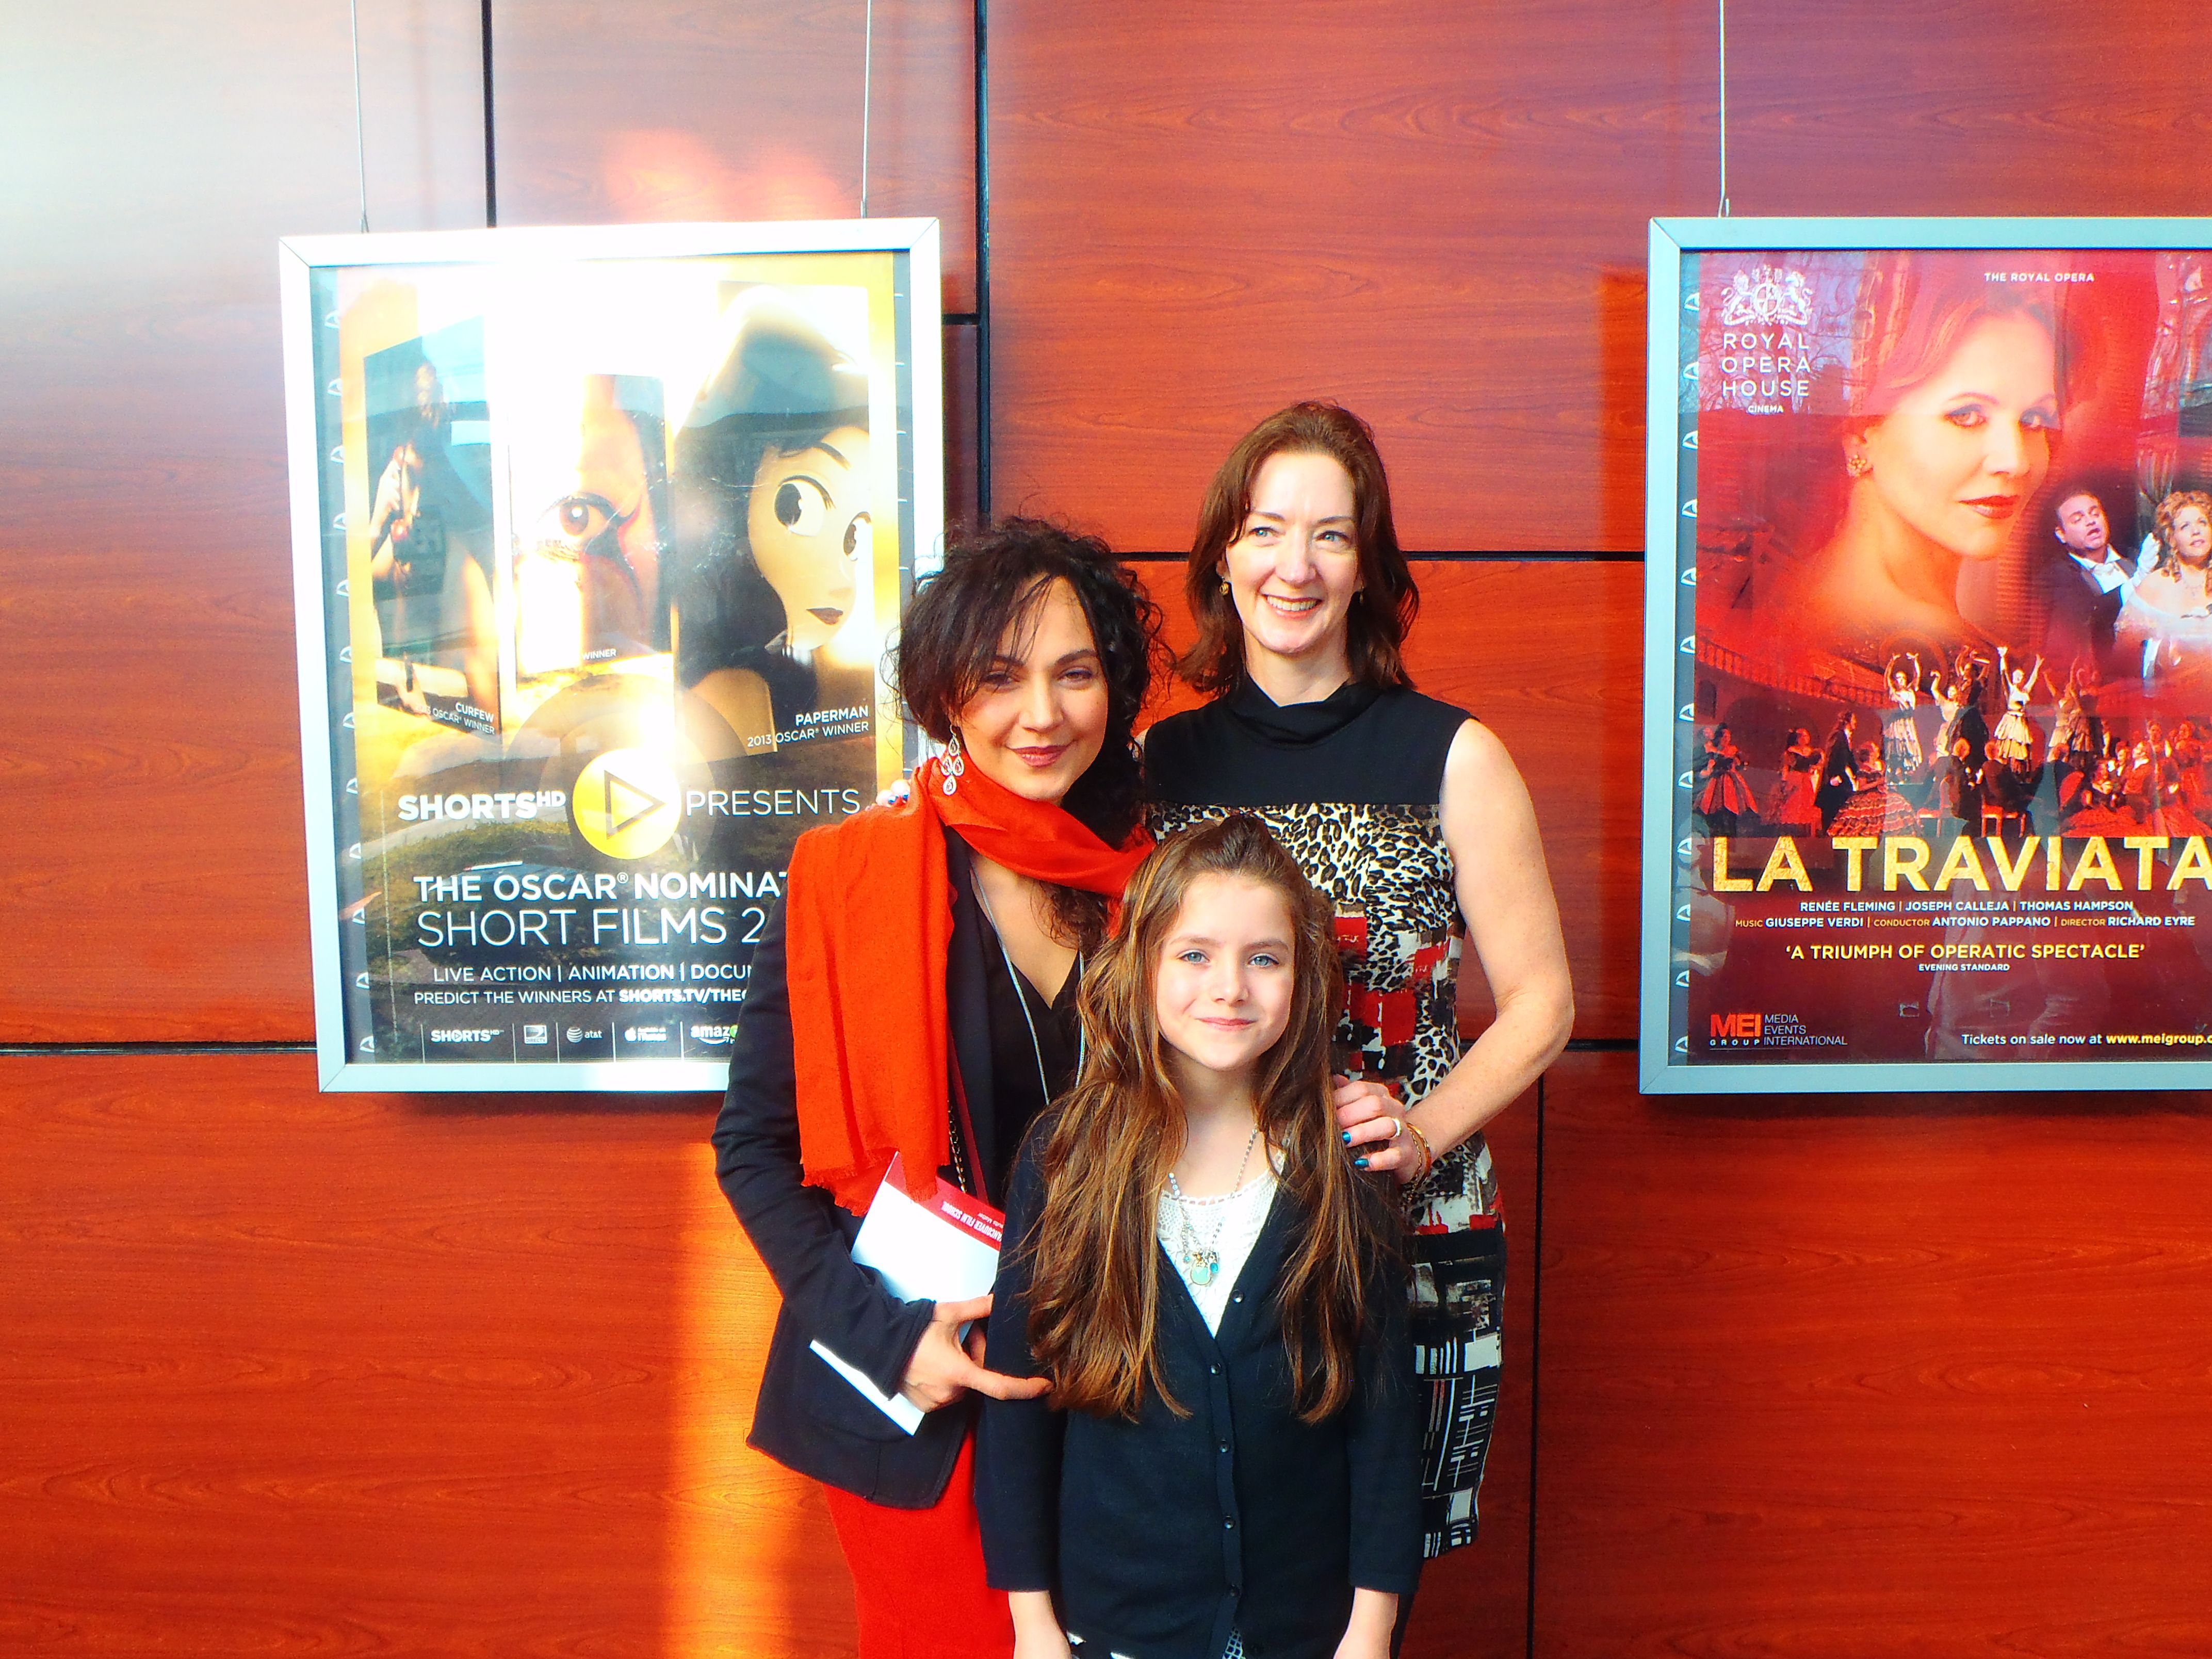 First screening of Lonely Dream, with Amelia Croft (Fiona), Director Violet Modaressi, and actor Shelley Janze.